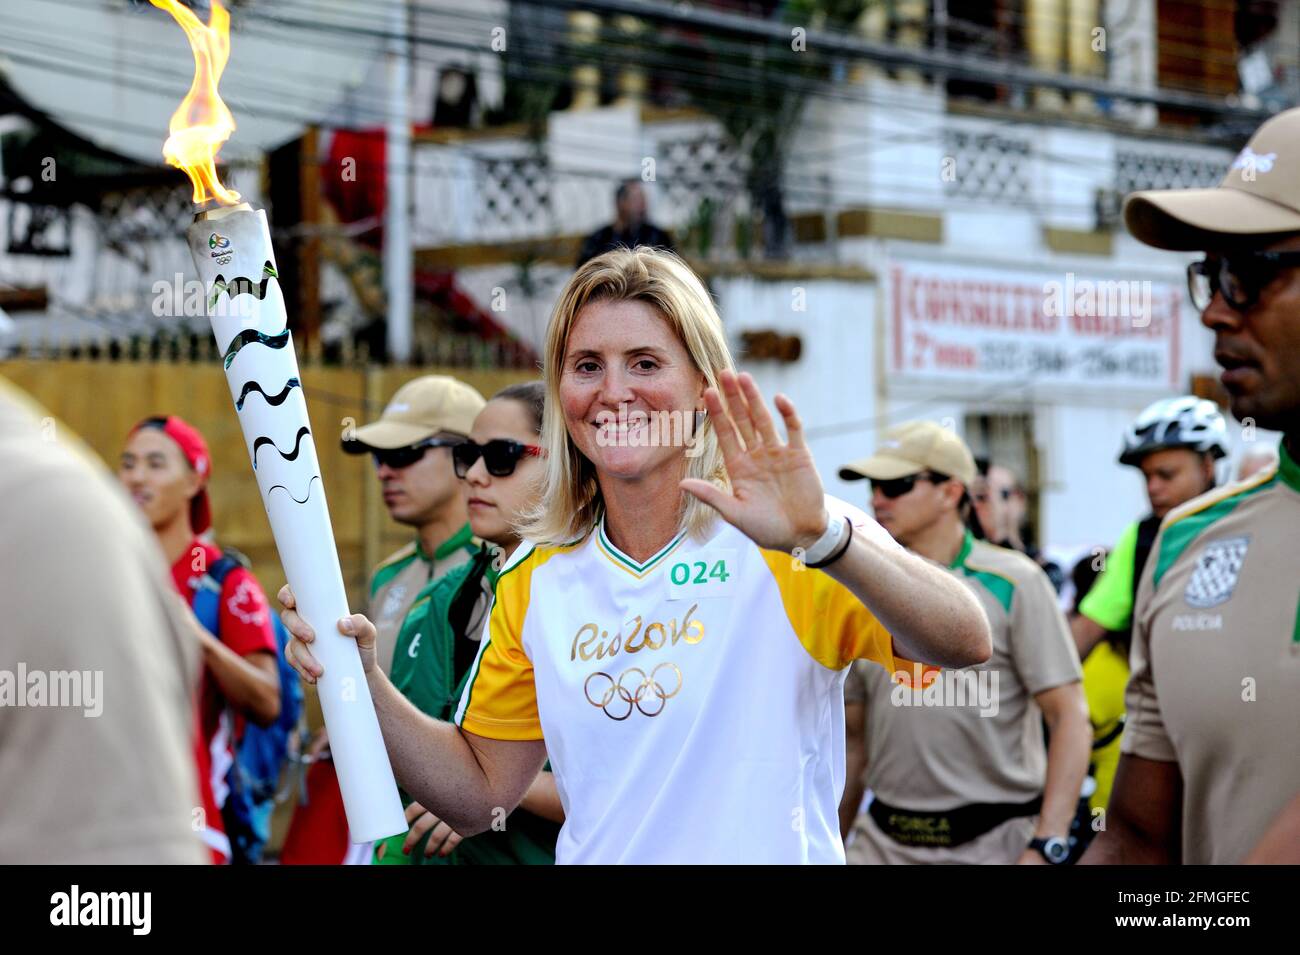 Brazil – August 5, 2016: A torchbearer smiles and waves for the camera during the final hours of 2016 Olympic Torch Relay held in Rio de Janeiro. Stock Photo